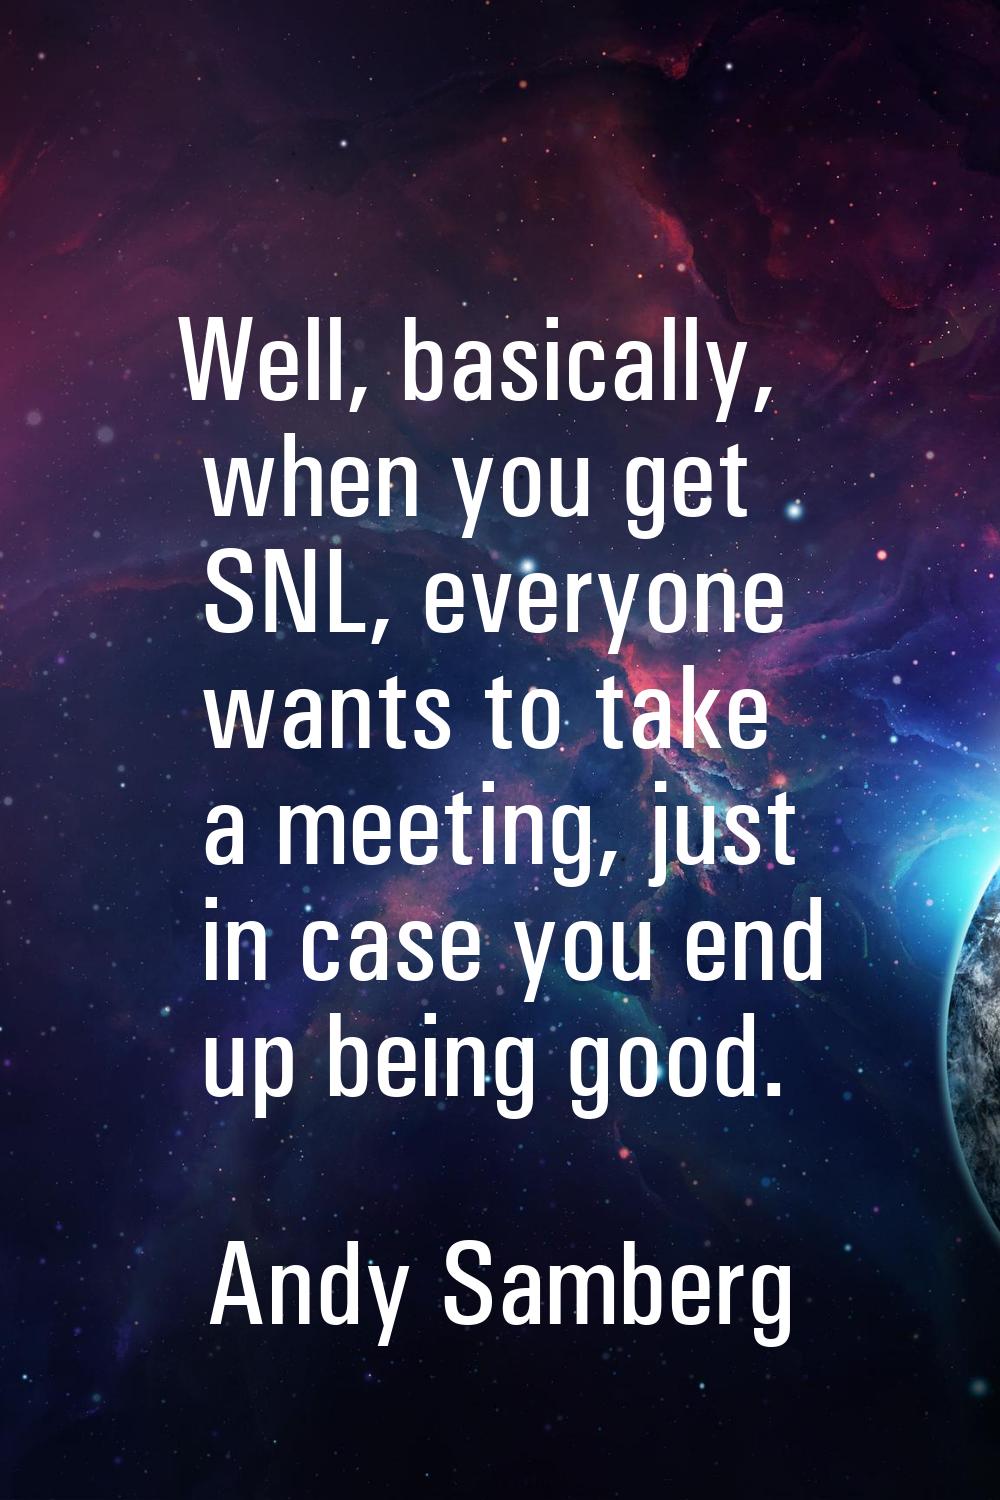 Well, basically, when you get SNL, everyone wants to take a meeting, just in case you end up being 